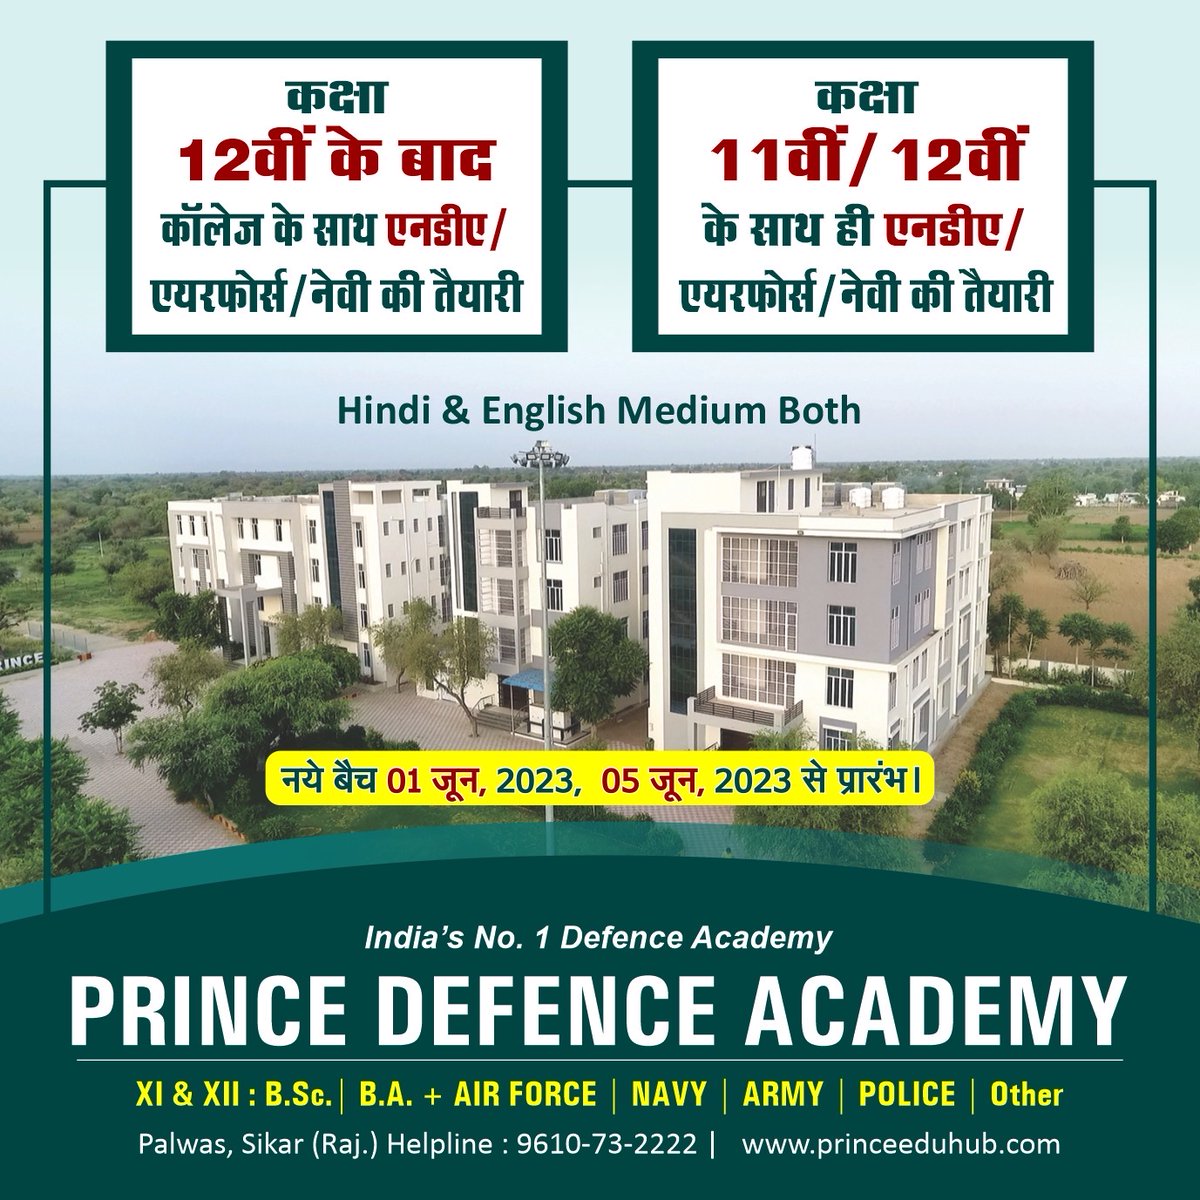 New batches start from 01 & 05 June 2023📣
#call_now : 9610732222, 9610742222
#Prince_Defence_Academy

#princeeduhub #defence #airforce #navy #army #PrinceDefenceAcademy #EnrollNow #bestdefenceacademy